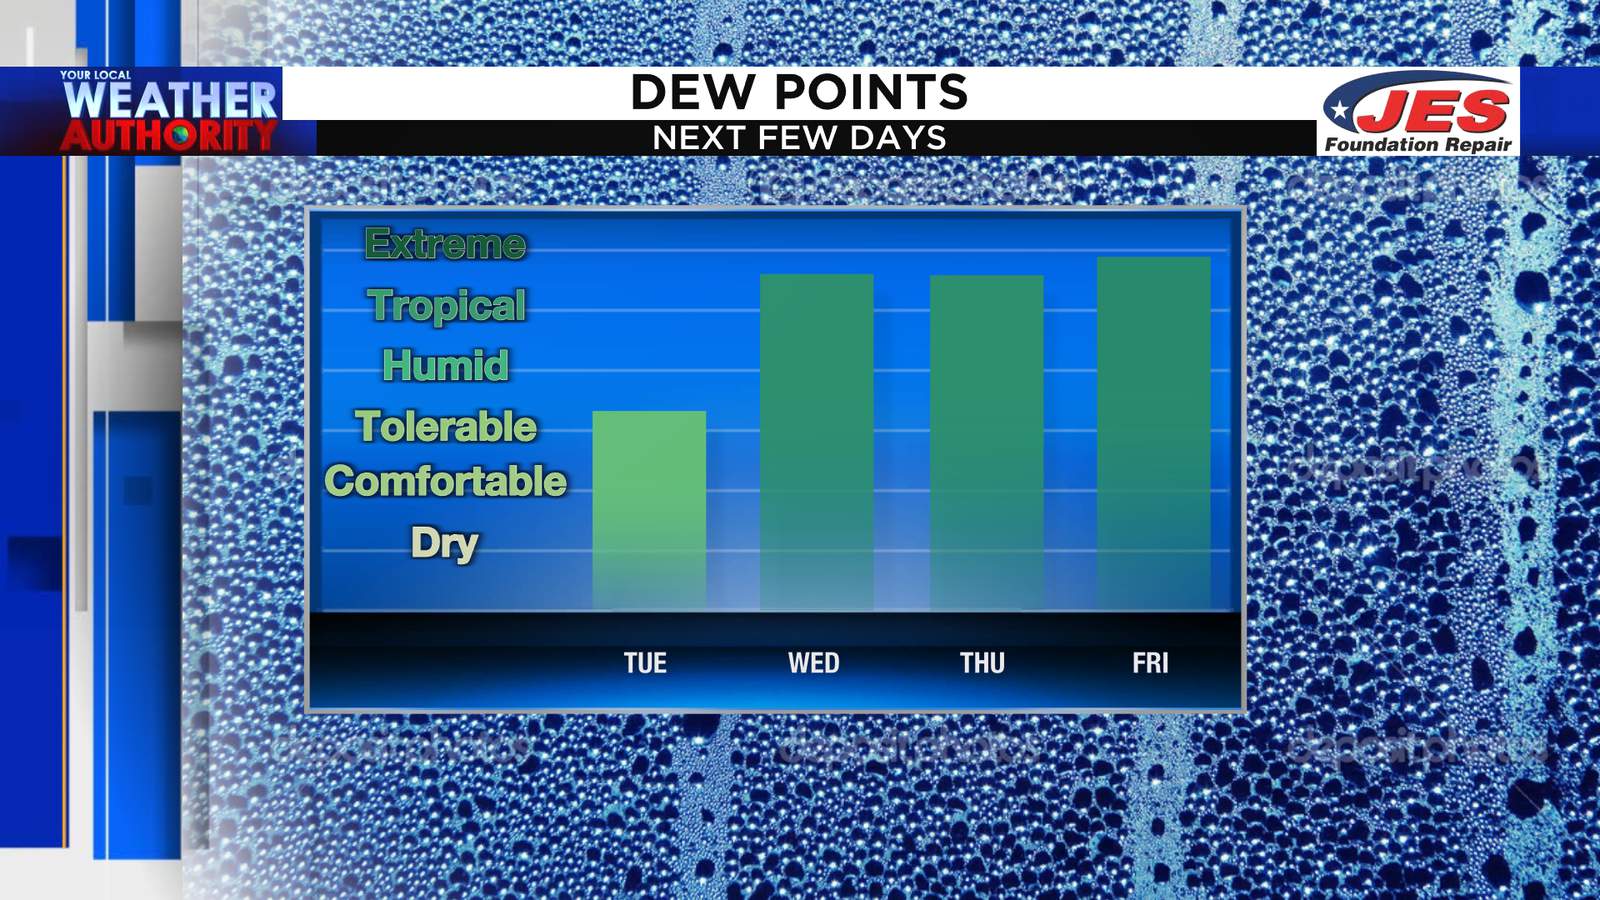 Sorry, yall. Humidity returns the rest of the week